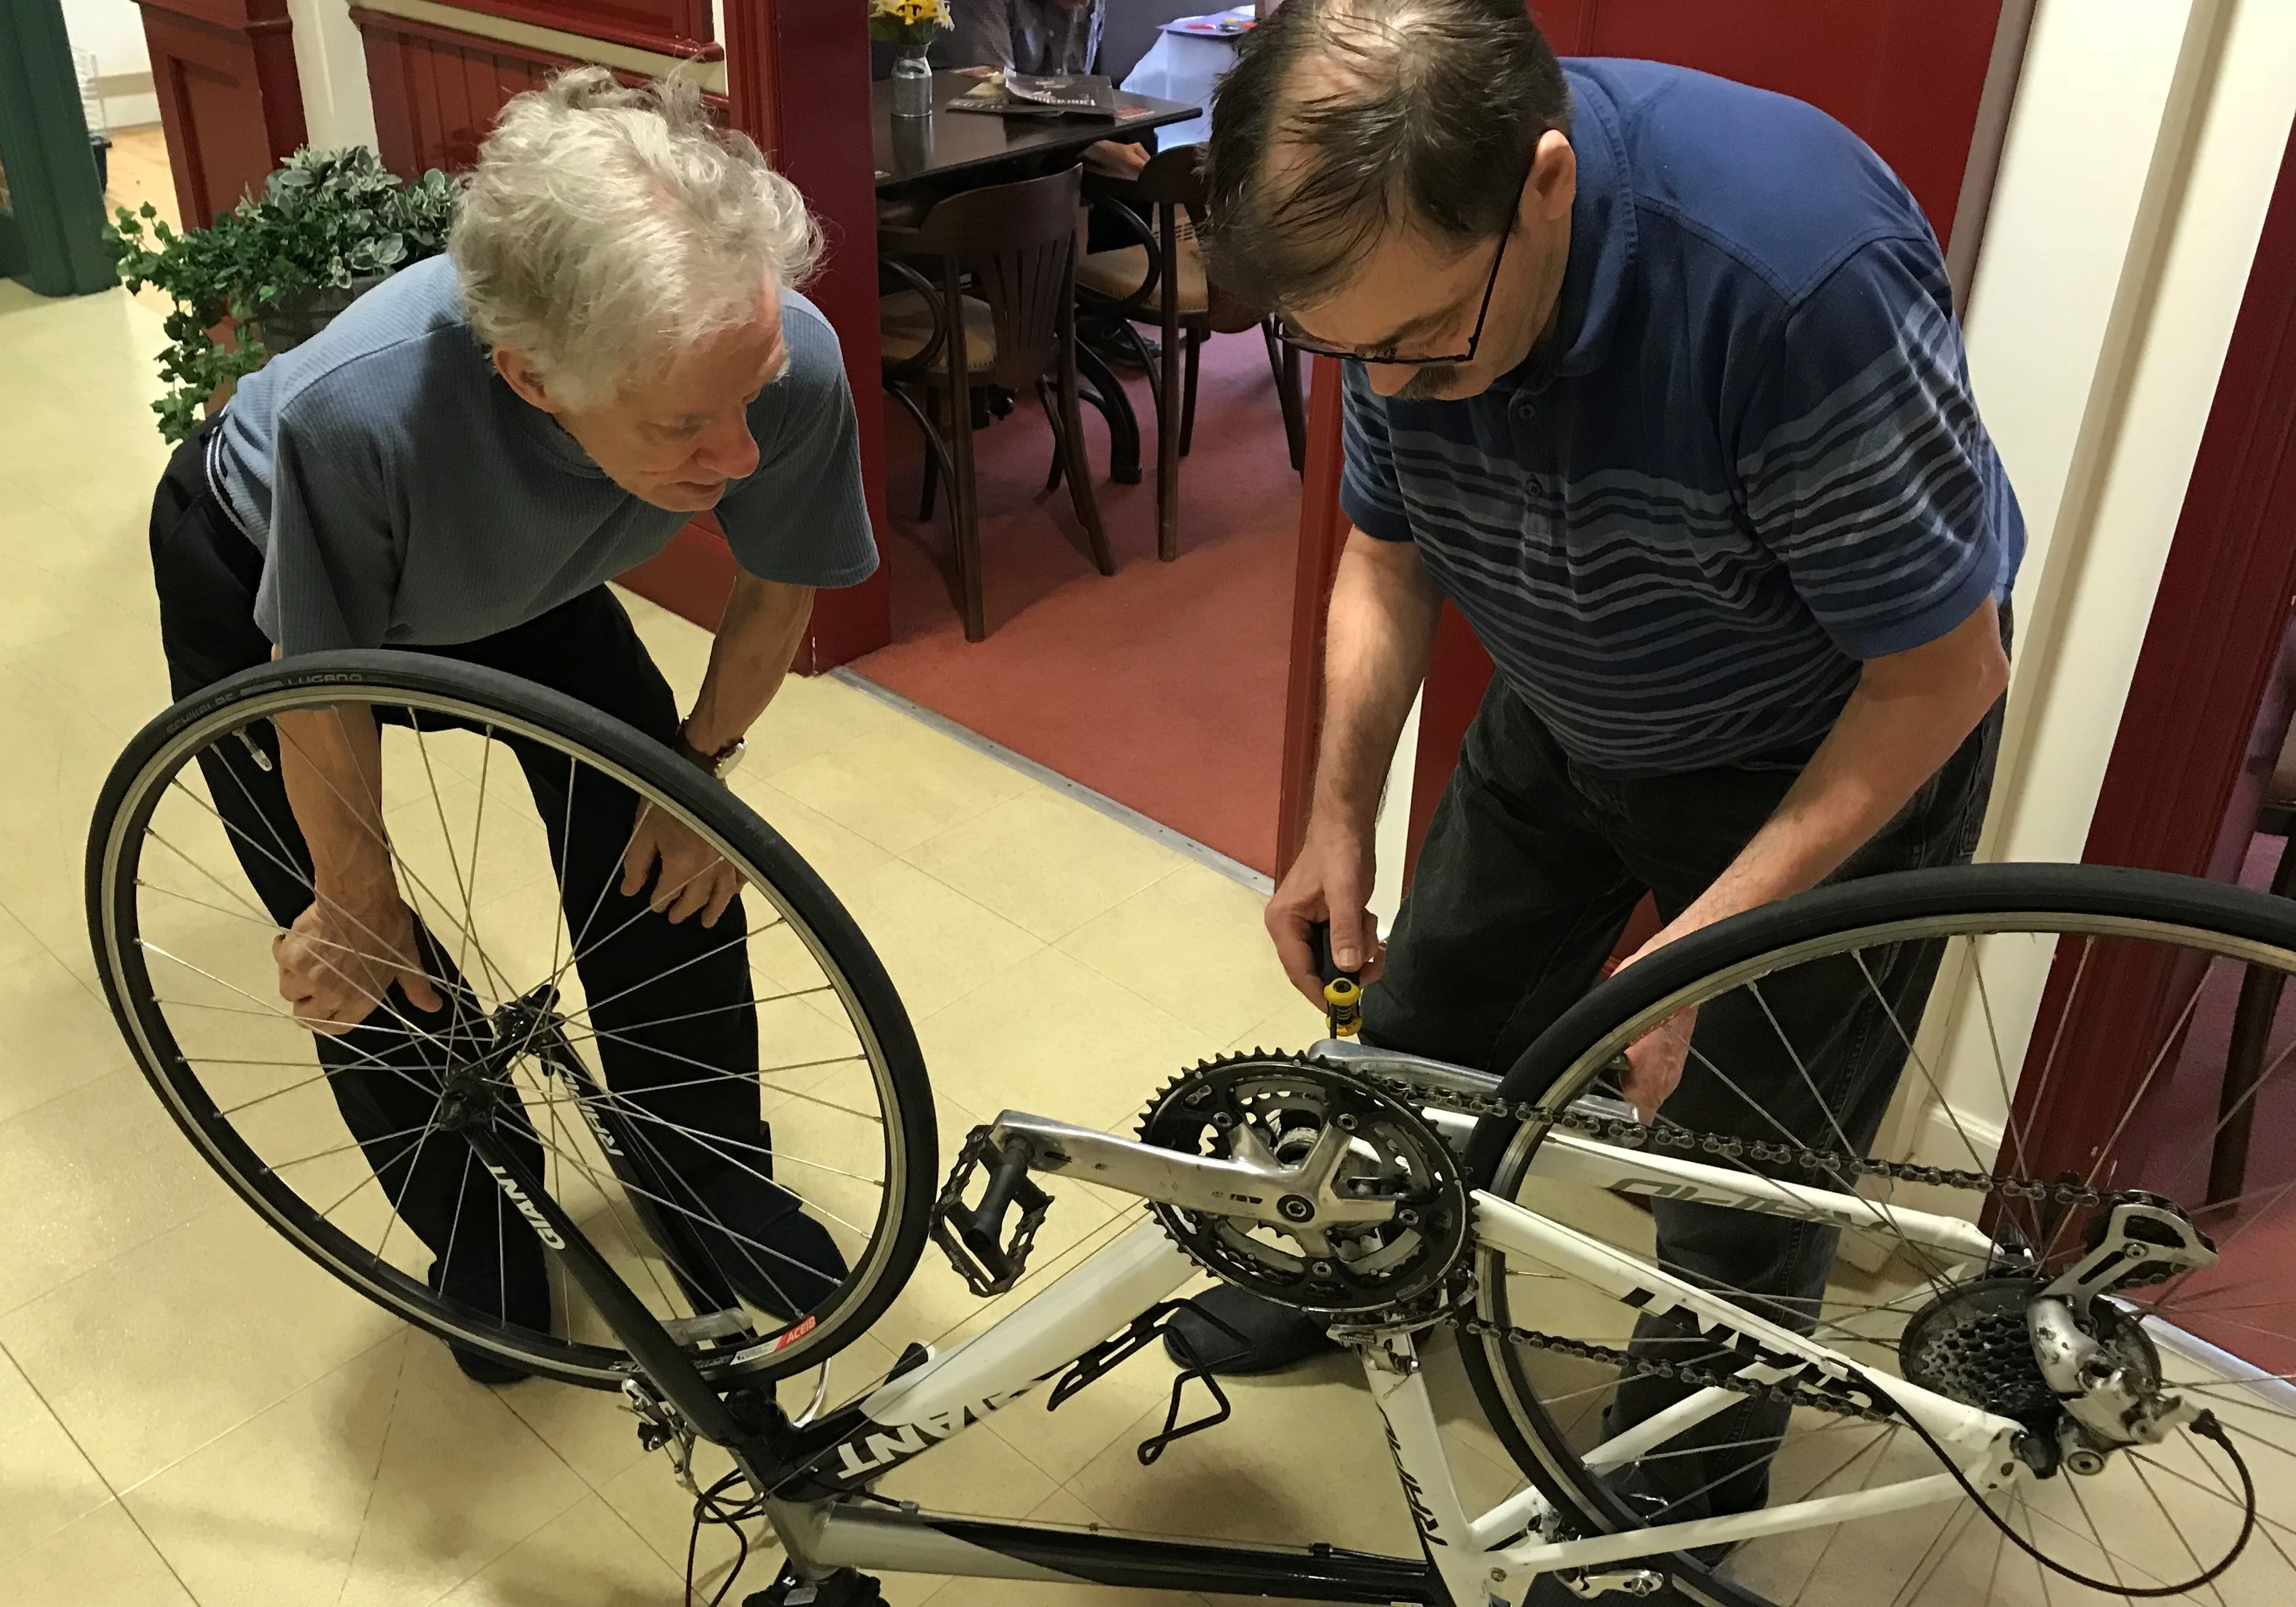 Stephen Baylis and John Bossom working to fix bikes donated by Hewitt Cycles